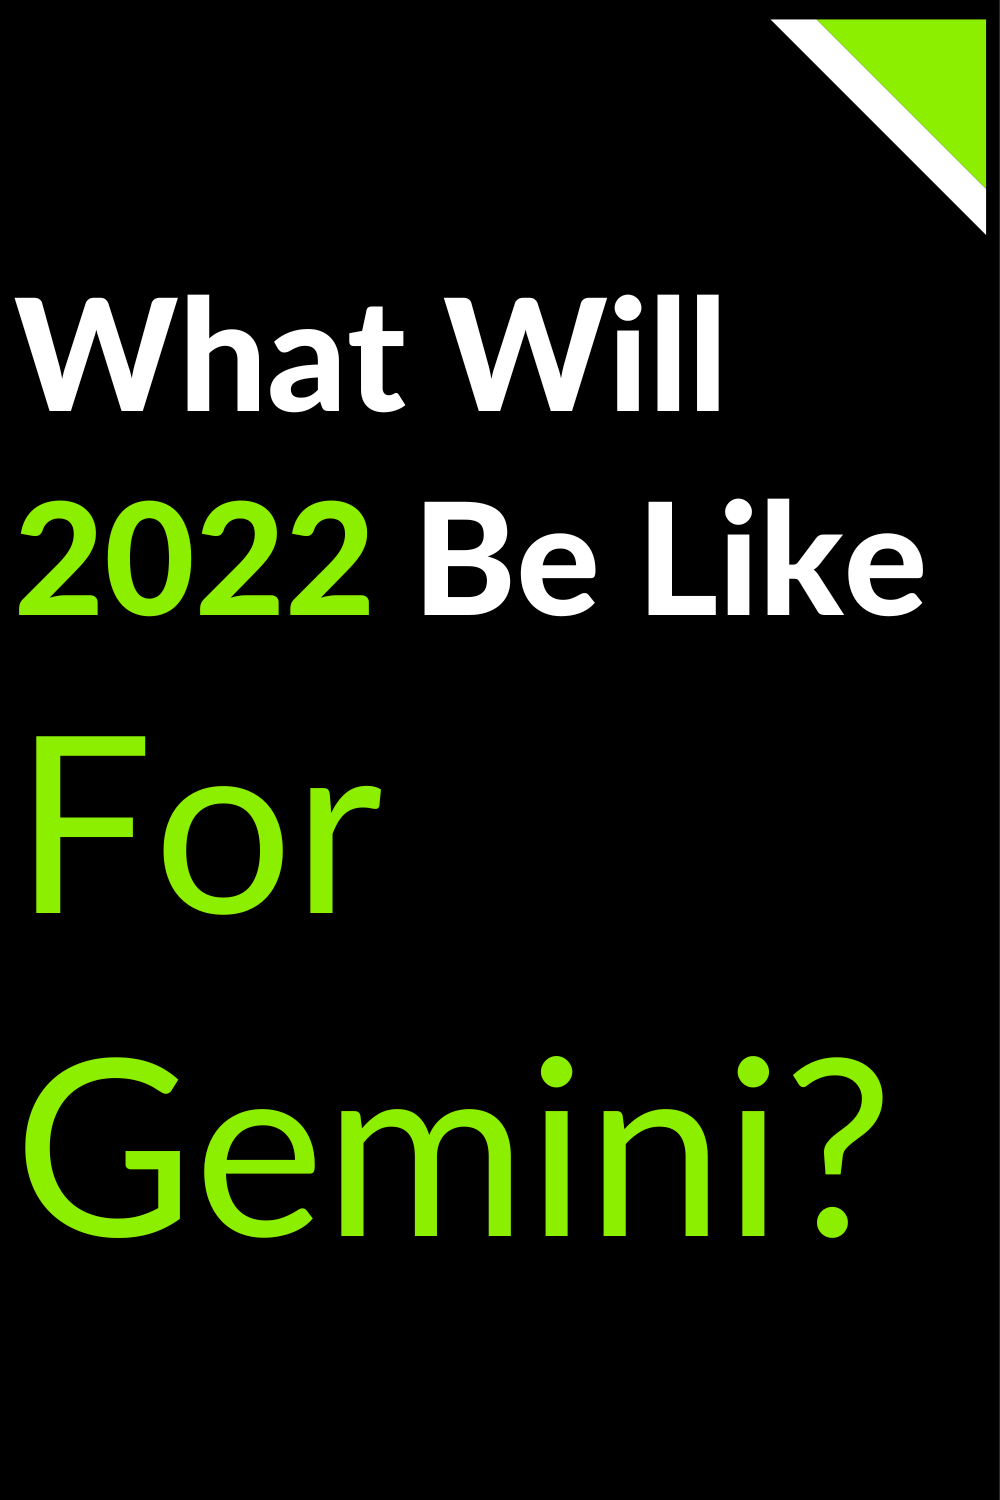 What Will 2022 Be Like For Gemini?